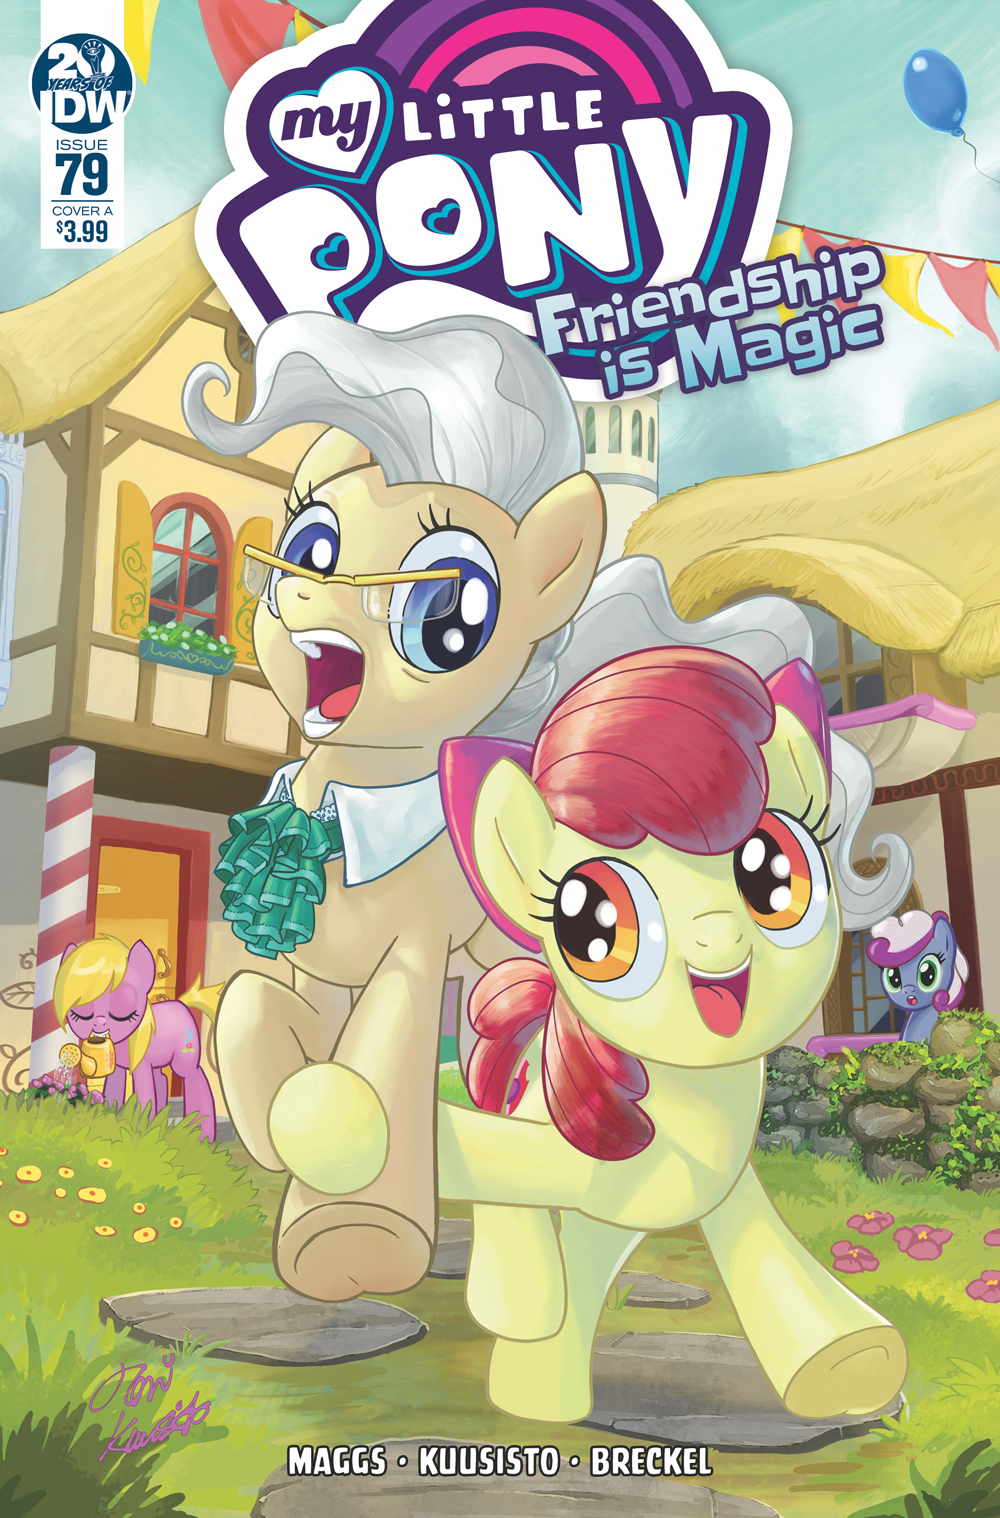 My Little Pony: Friendship is Magic no. 79 (2013 Series)